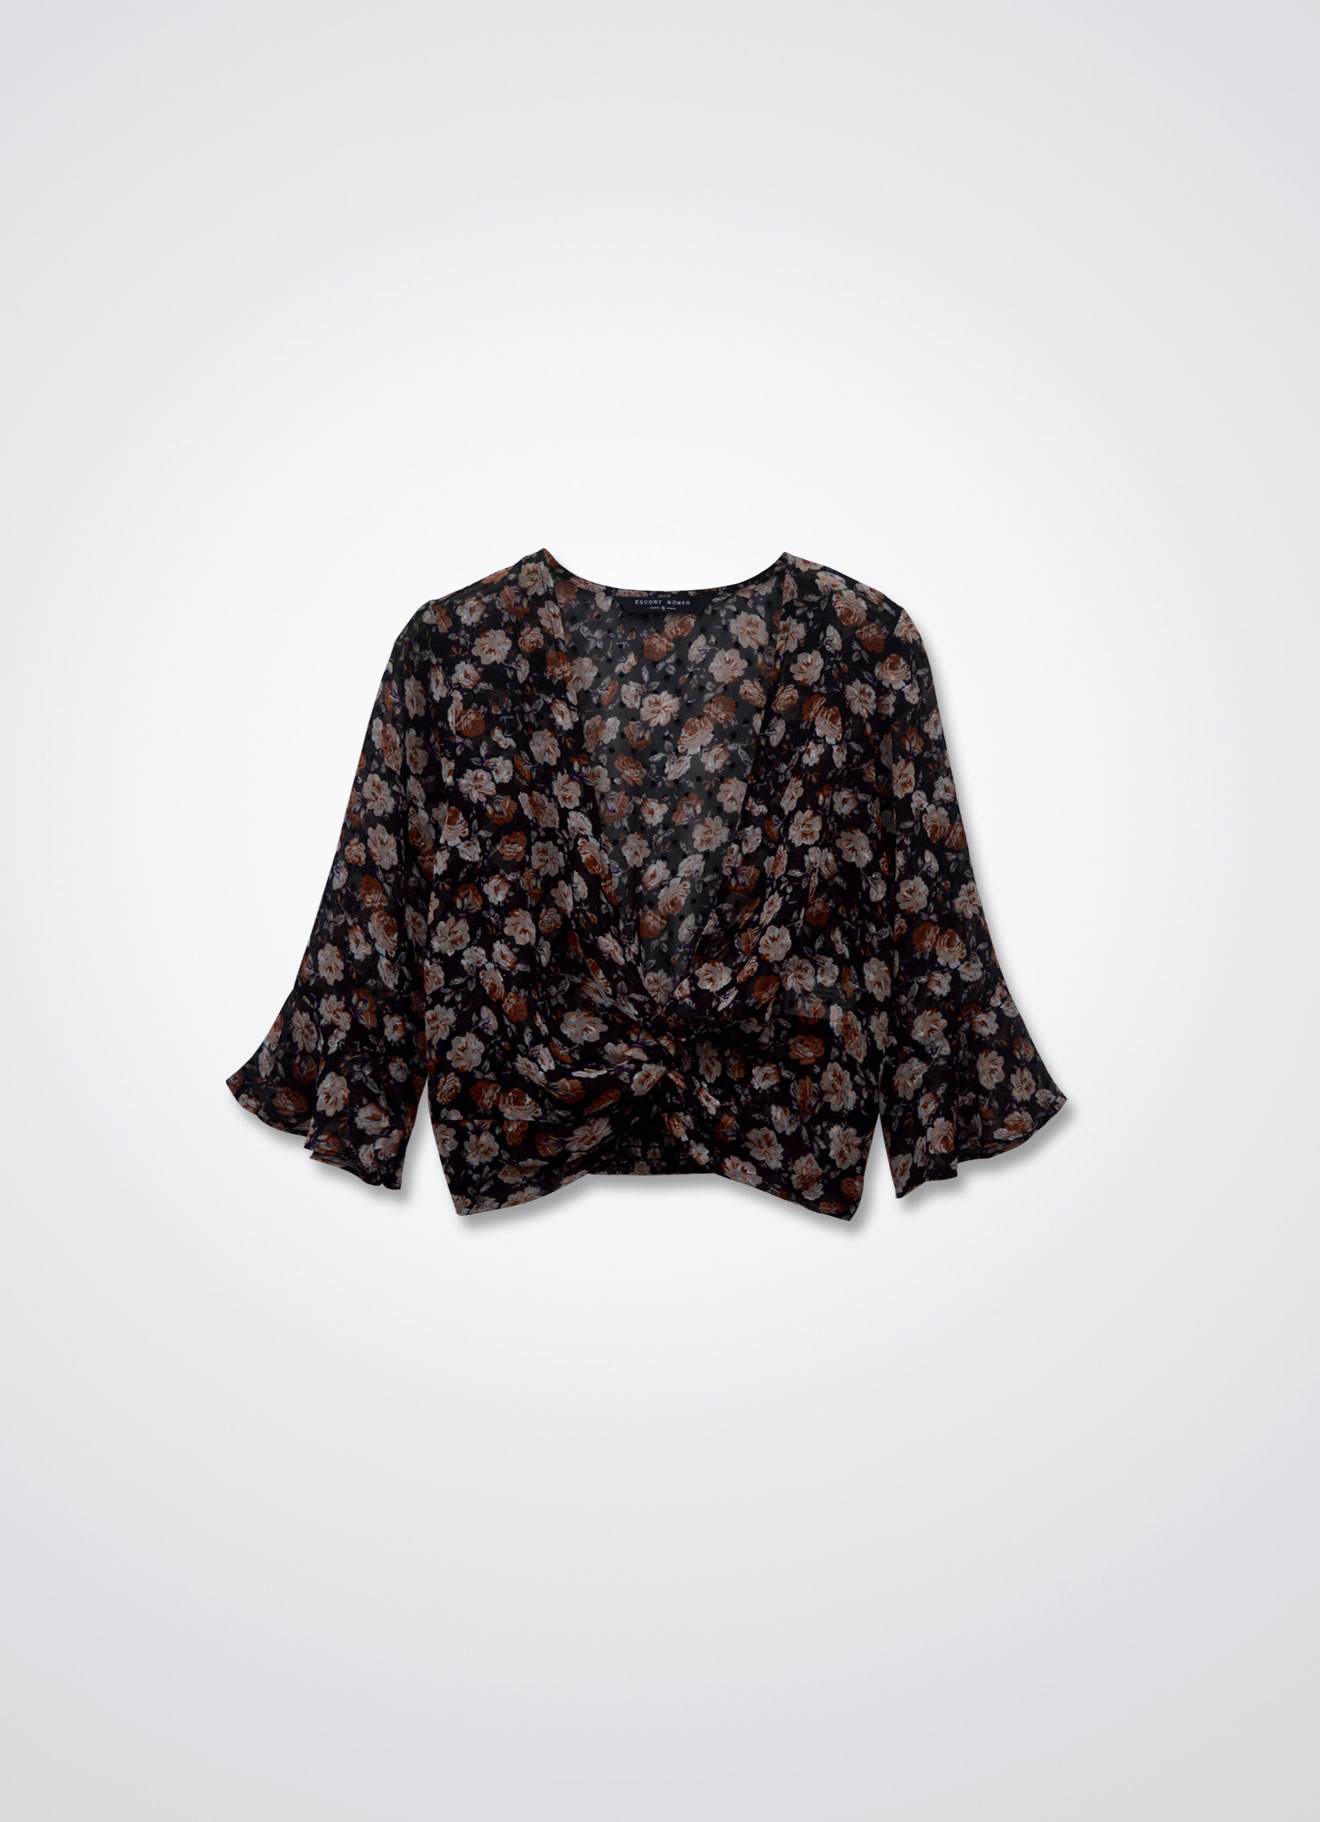 Amber-Brown by Printed Blouse